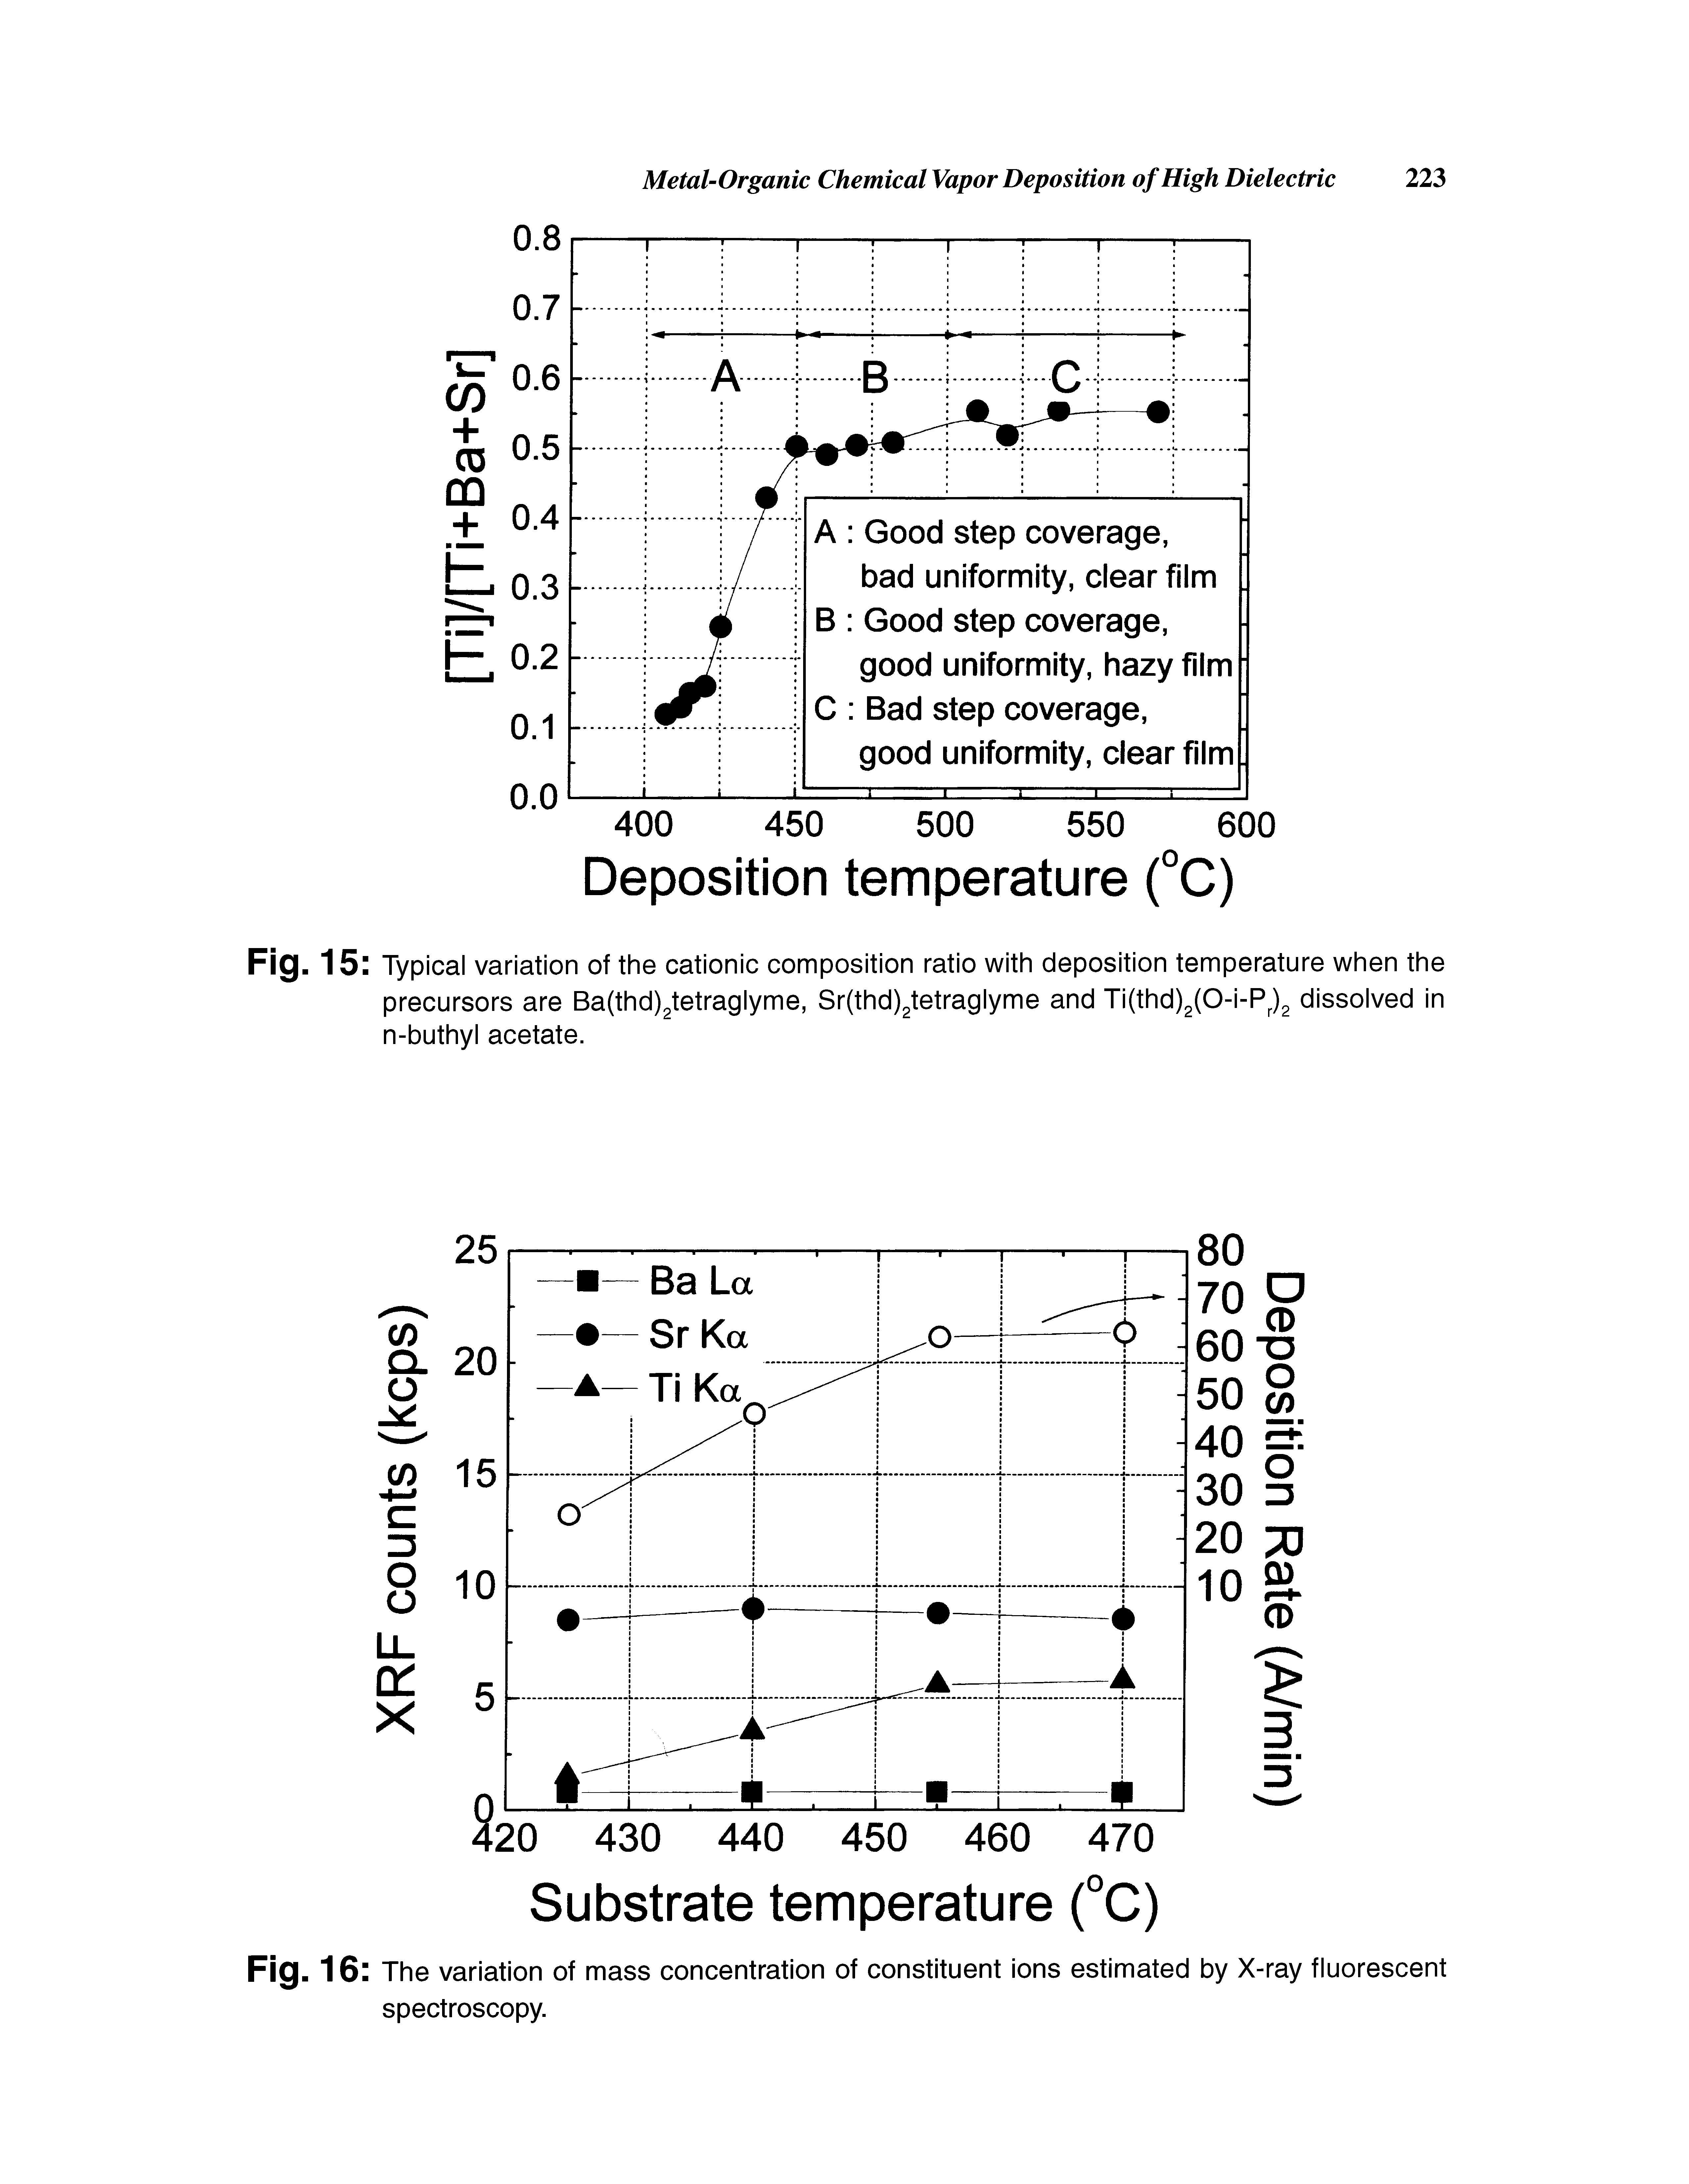 Fig. 15 Typical variation of the cationic composition ratio with deposition temperature when the precursors are Ba(thd)2tetraglyme, Sr(thd)2tetraglyme and Ti(thd)2(0-i-P )2 dissolved in n-buthyl acetate.